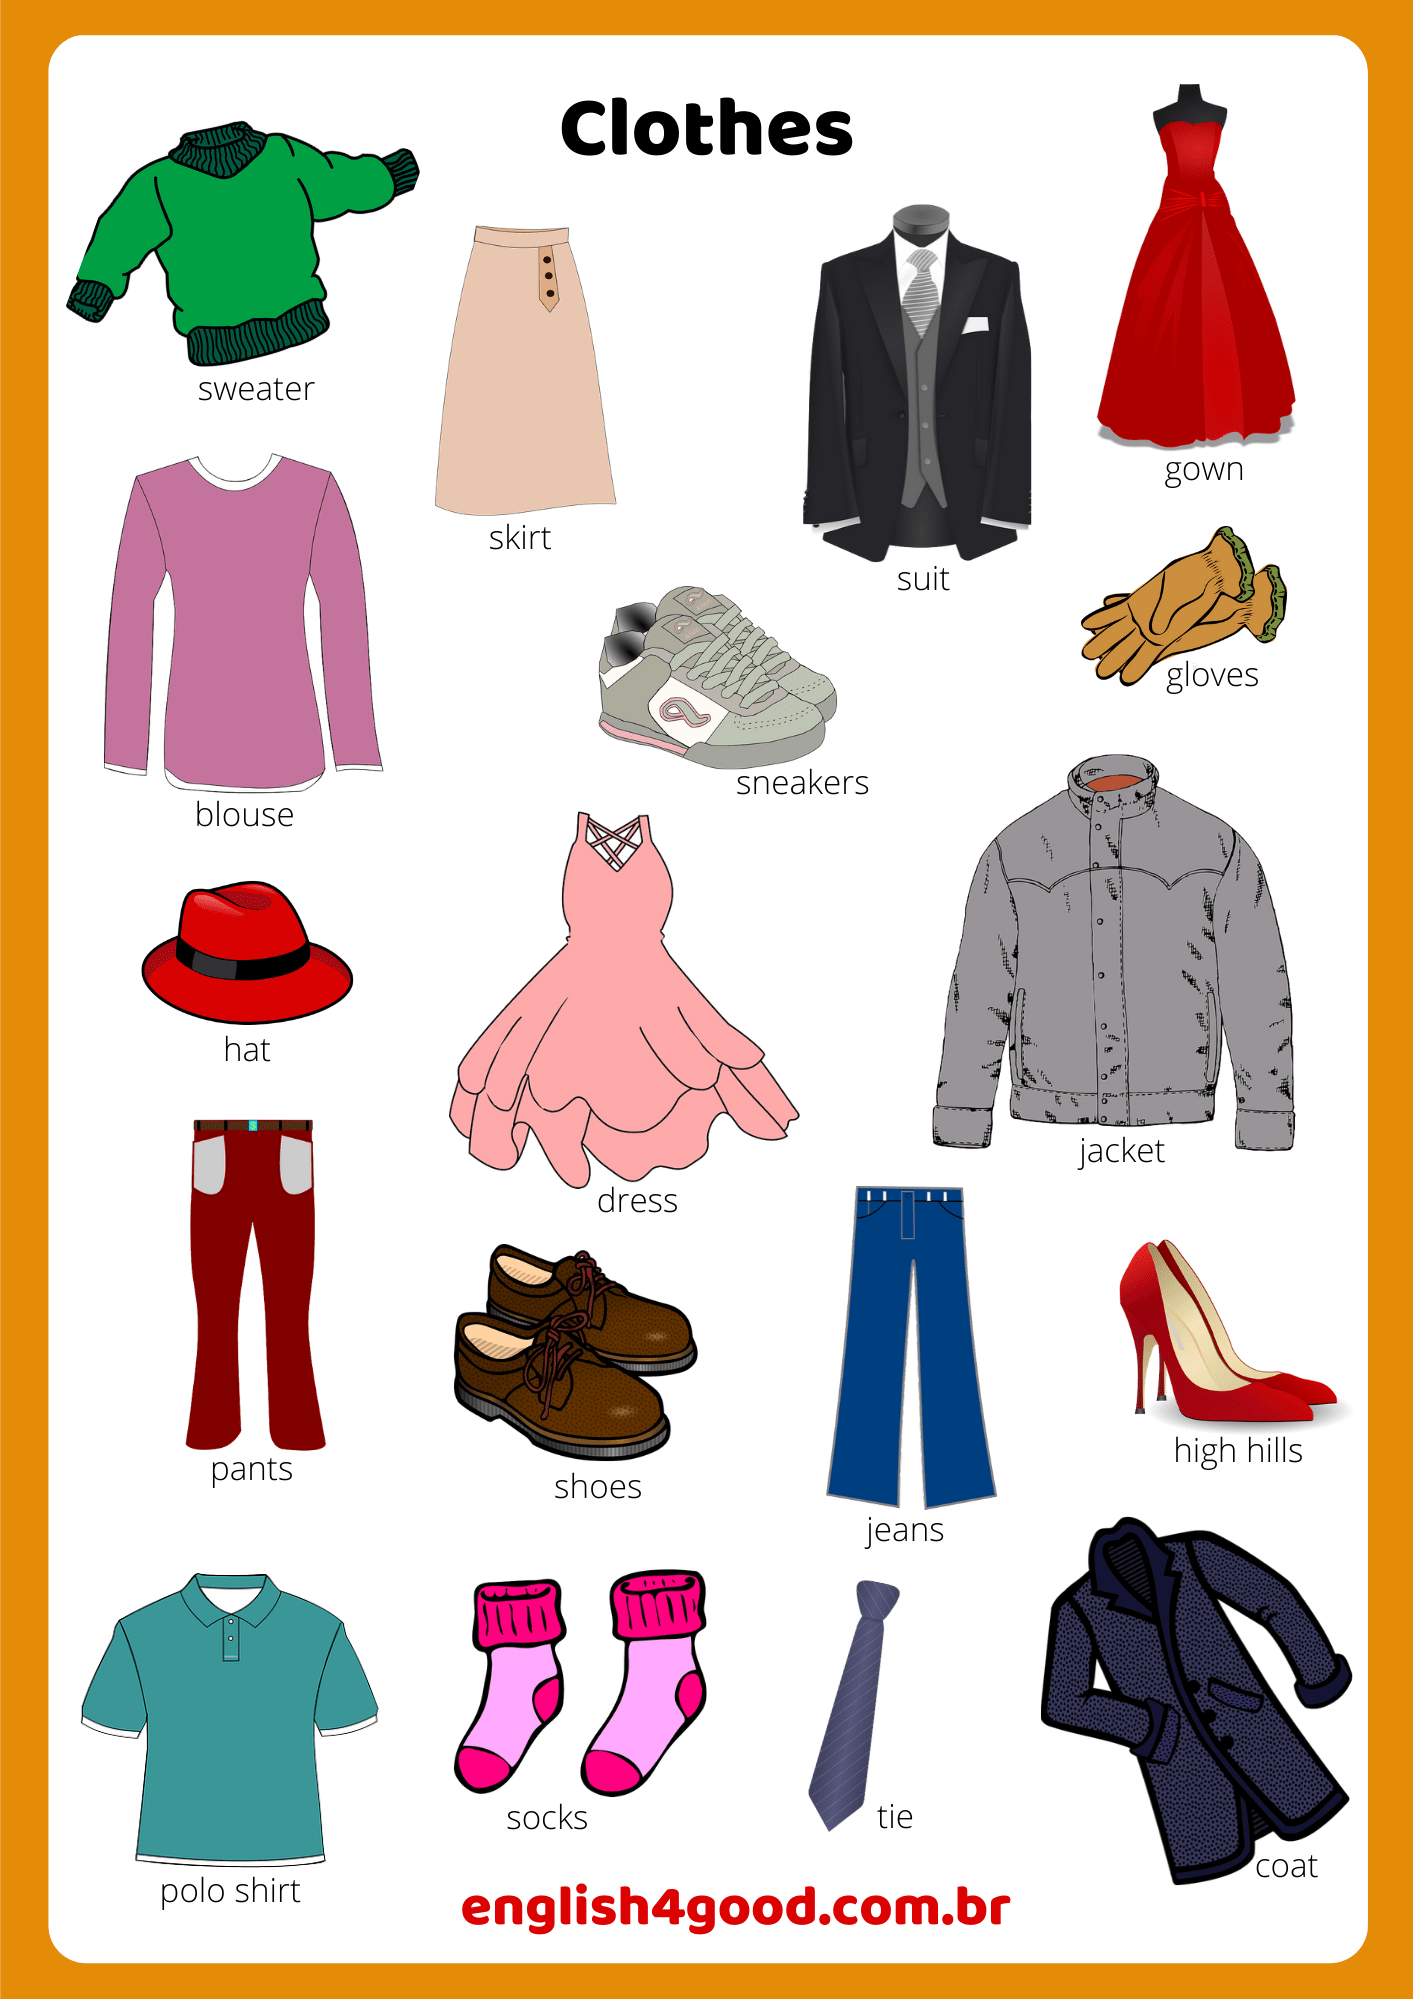 clothes-flashcards-english4good-vocabulary-practice